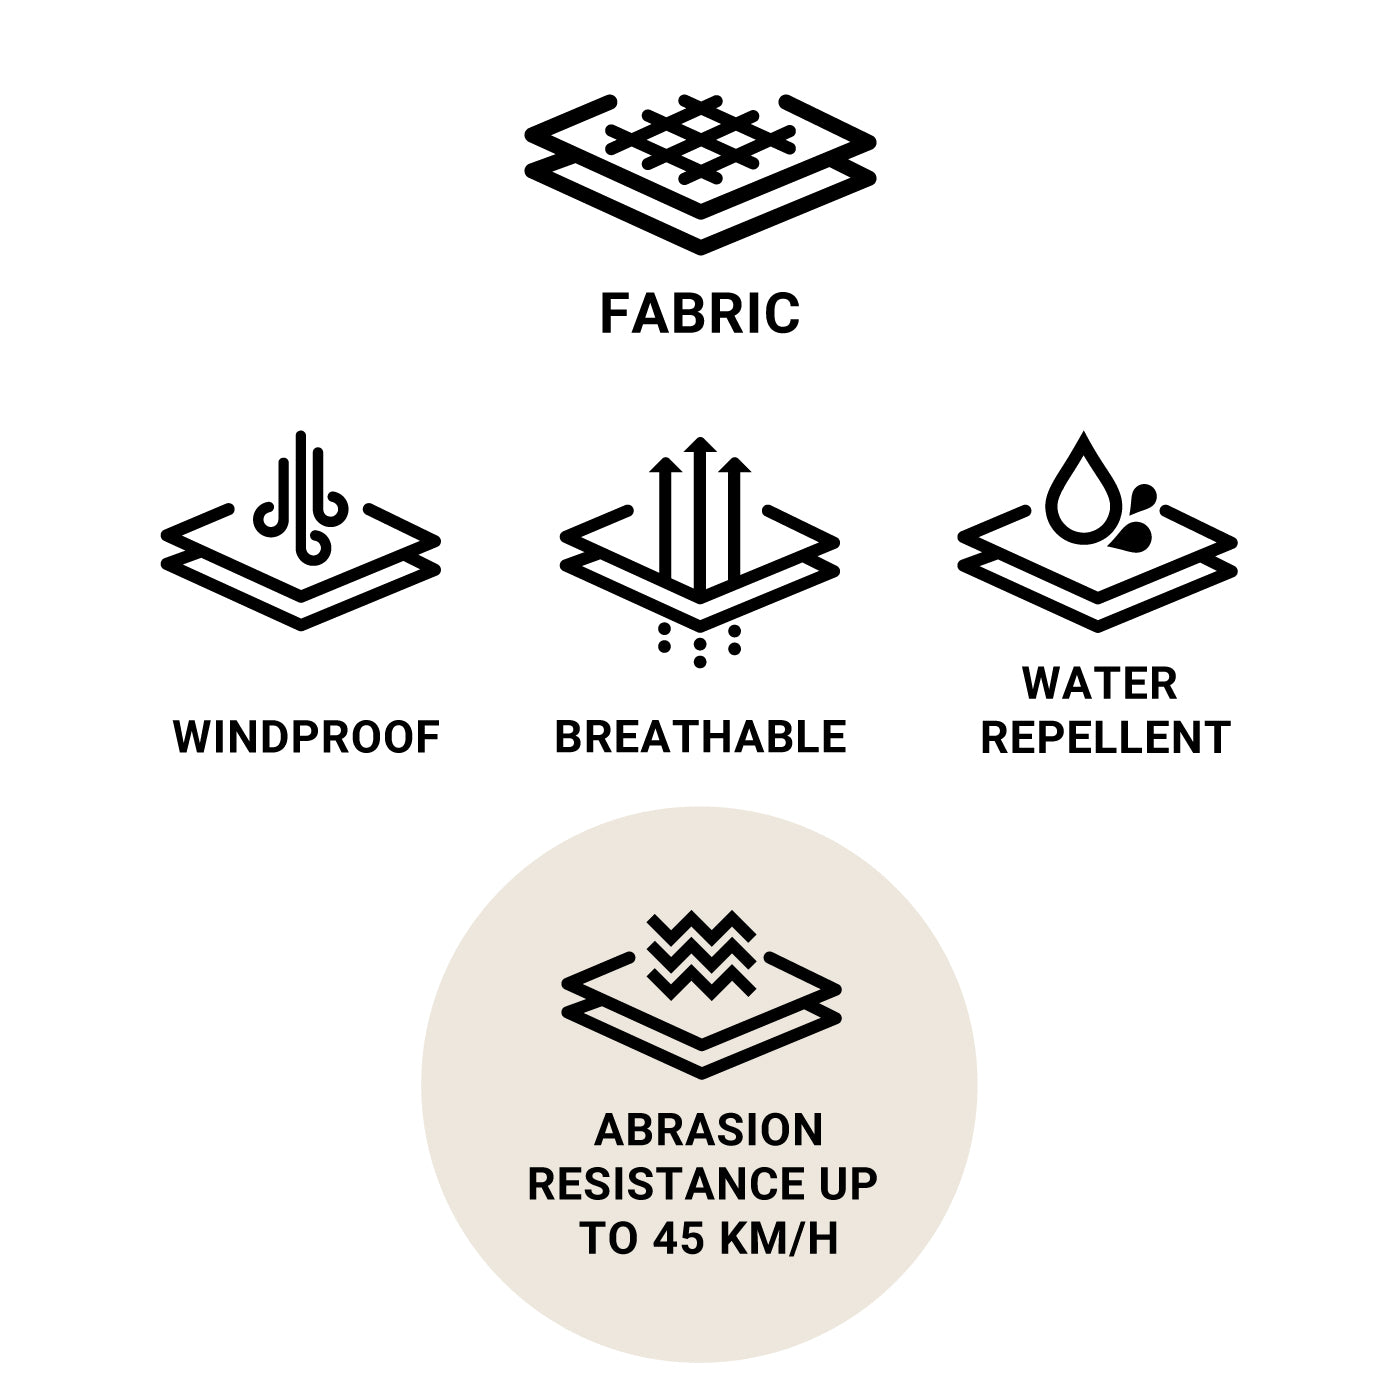 COTTON BASED FABRIC THAT IS ABRASION RESISTANT UP TO SPEEDS OF 45 KM/H | WATER REPELLENT | WINDPROOF | BREATHABLE| 